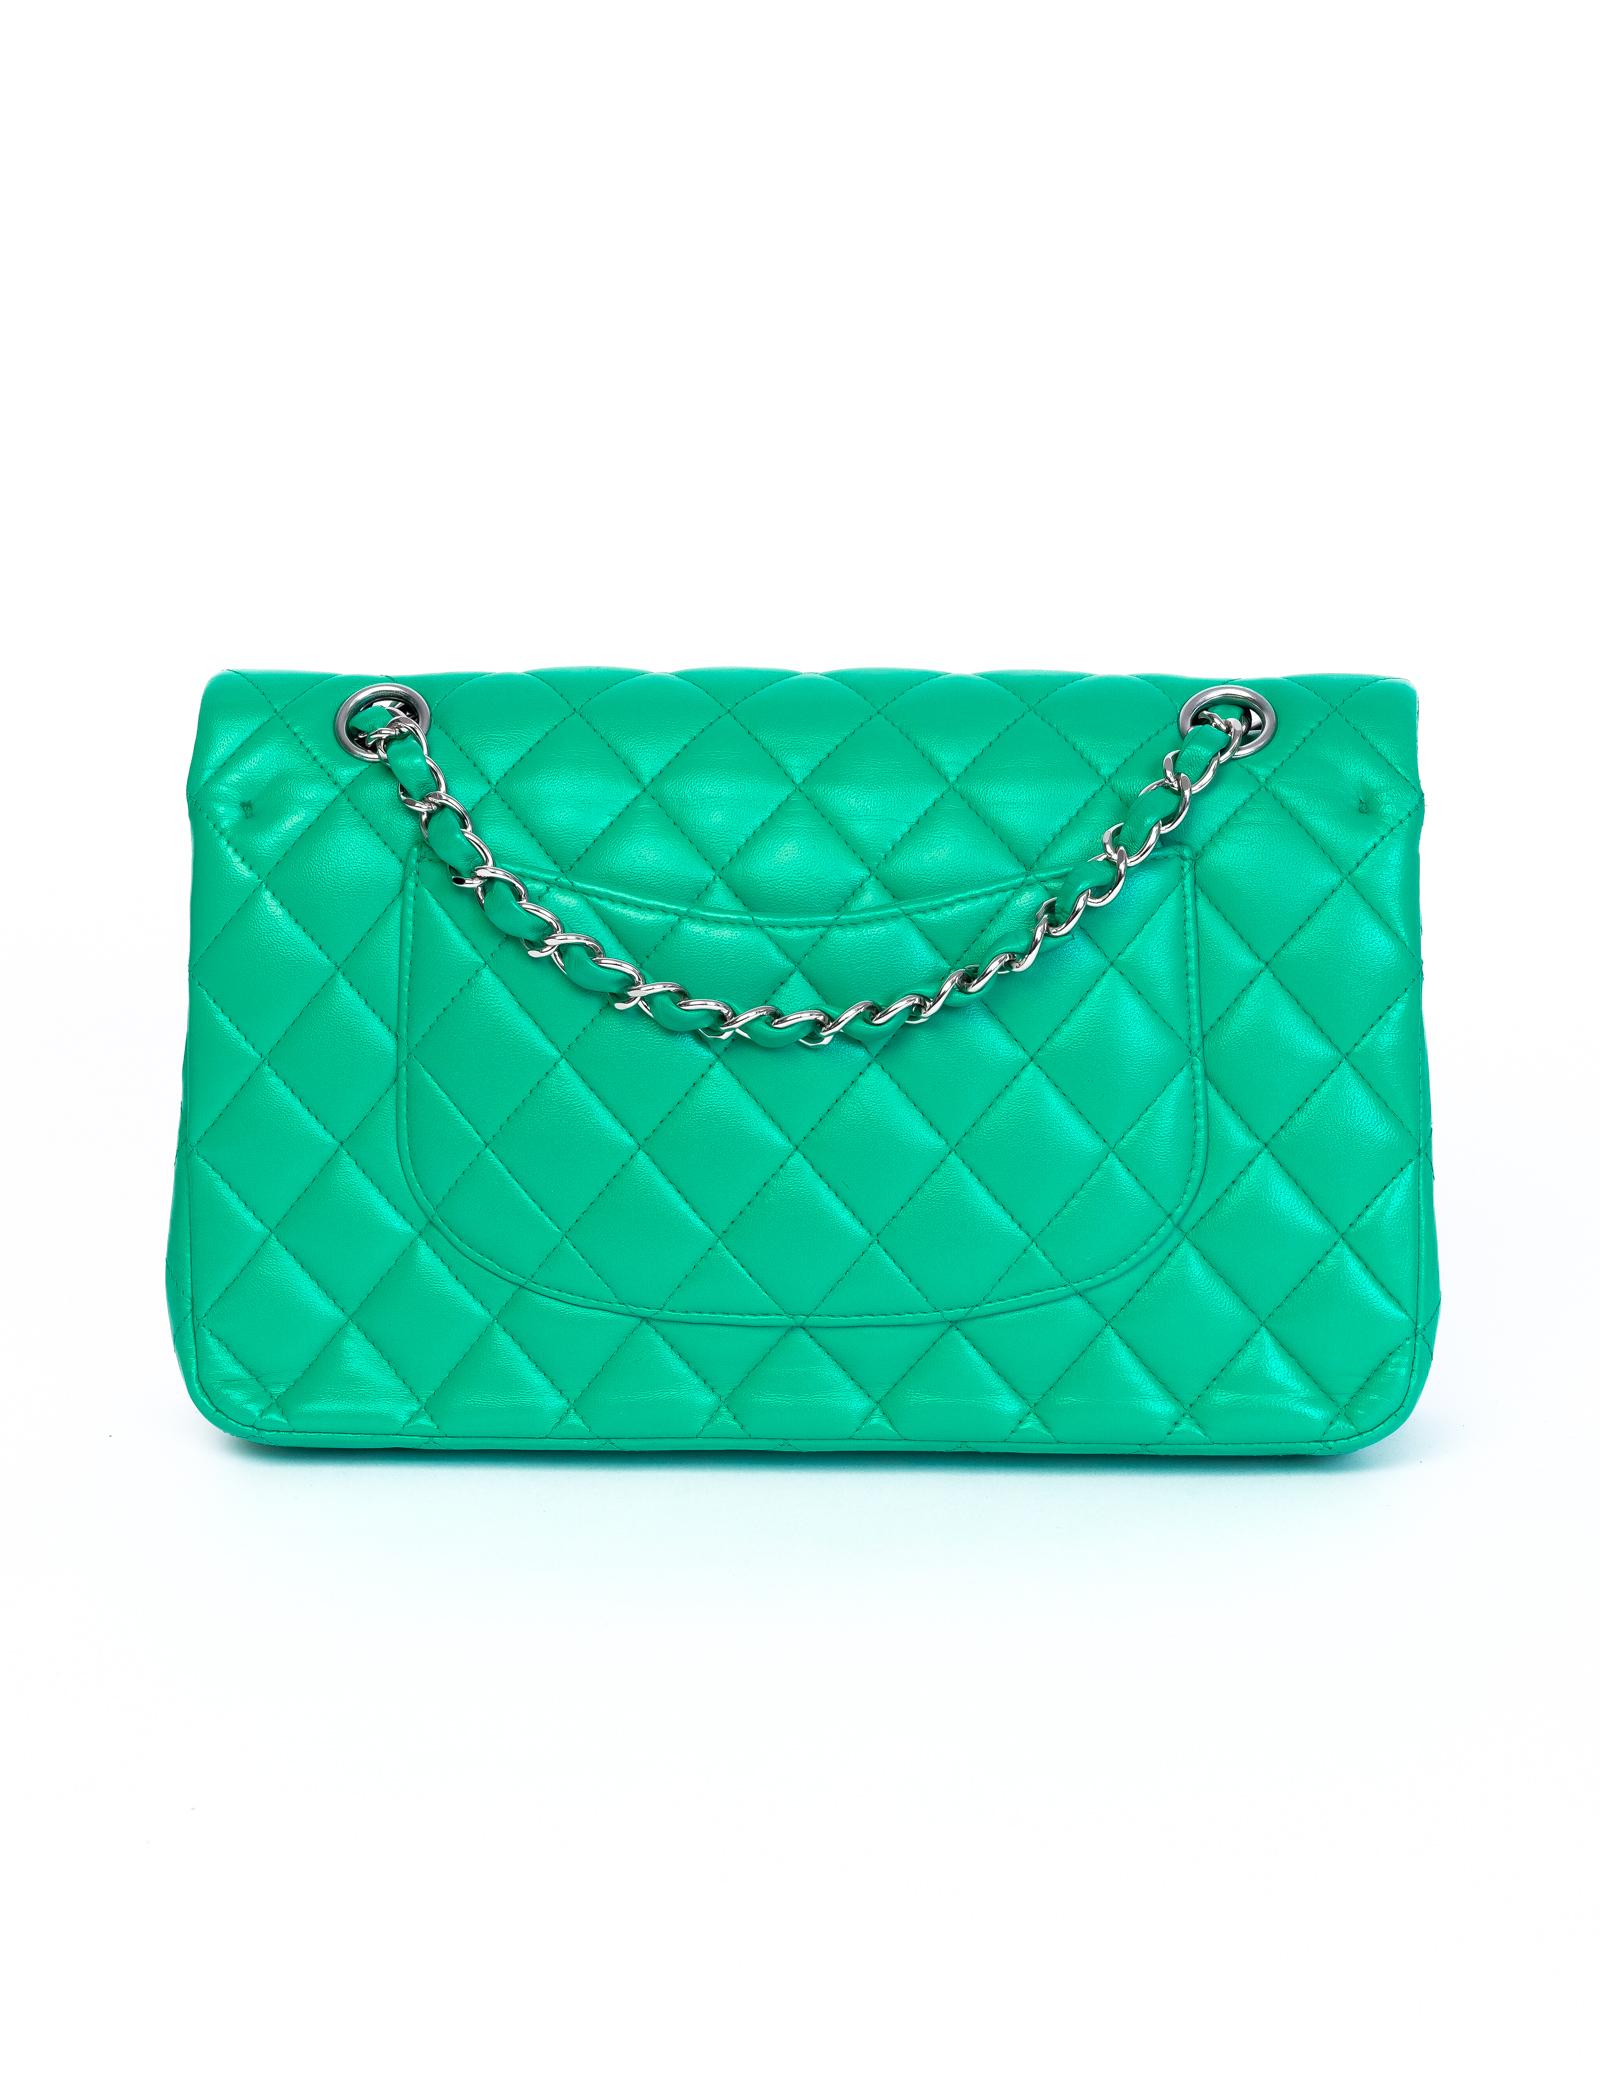 This Chanel Double Flap Bag is made with green lambskin leather with diamond quilting. Featuring sliver toned hardware, a silver toned chain interlaced with leather, an interlocking CC turn lock clasp, and a half moon back slip pocket. The interior